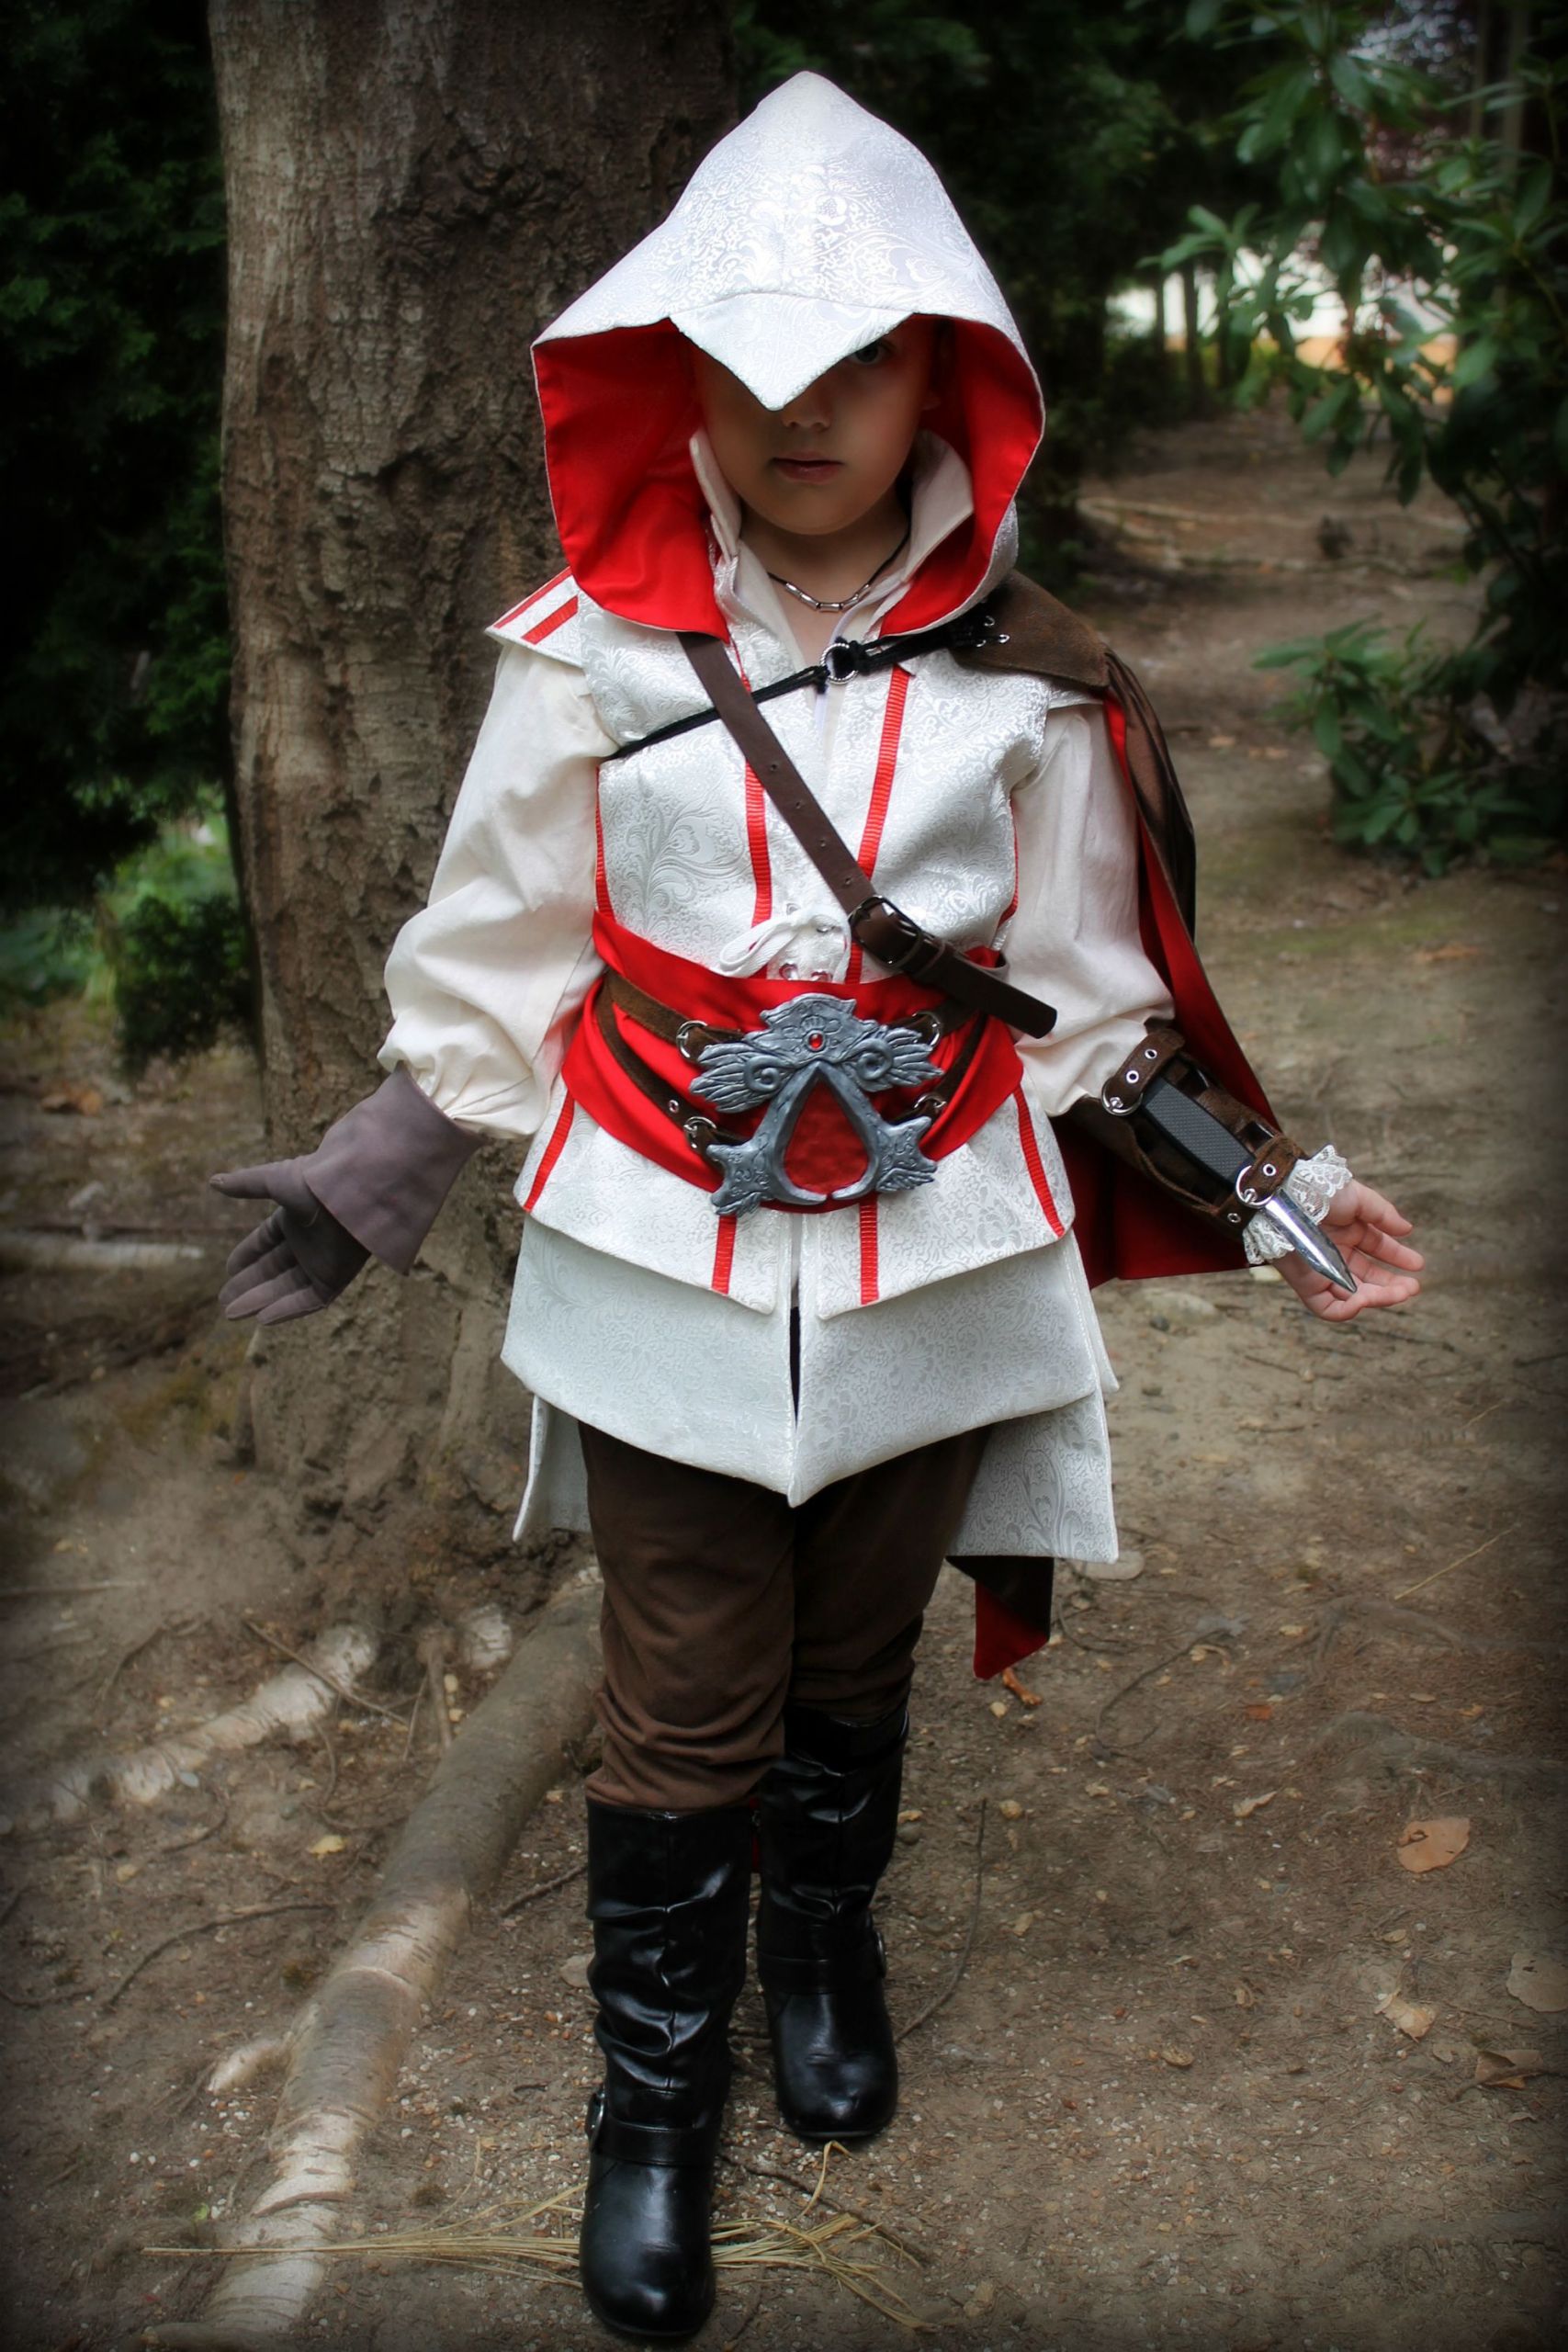 DIY Assassins Creed Costume
 My grandson in his Assassins Creed costume I made for him